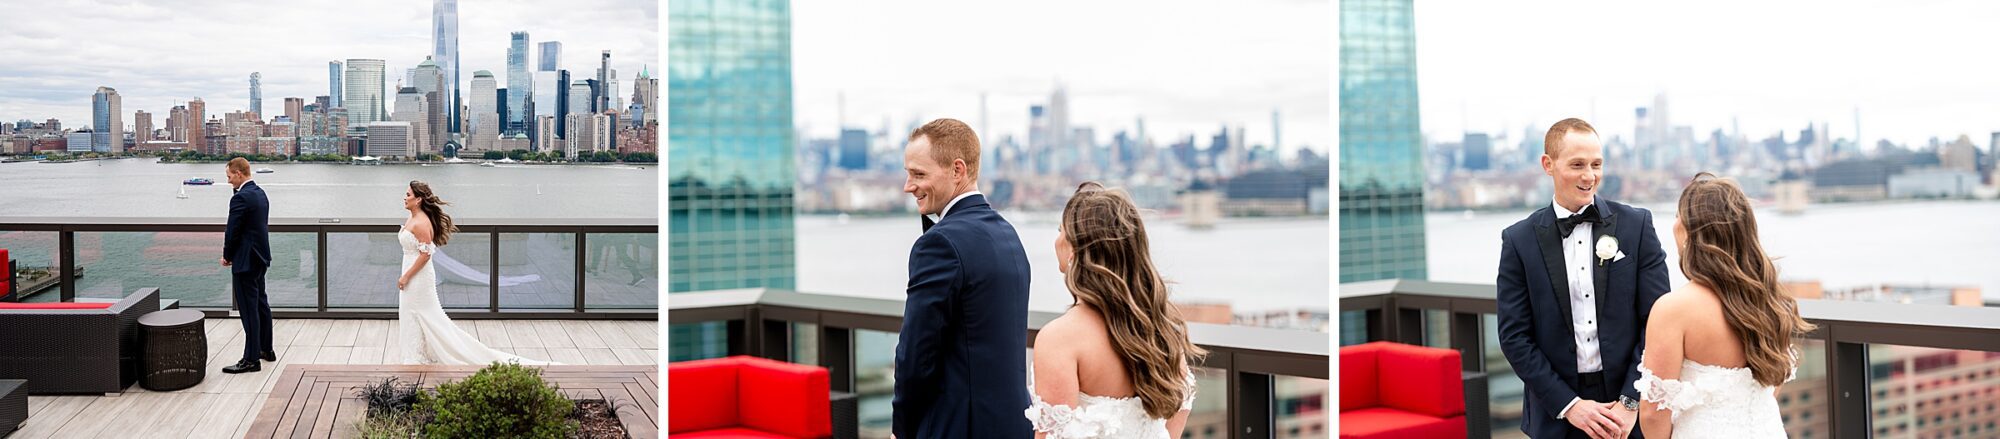 A bride and groom standing on a balcony with a view of the city.